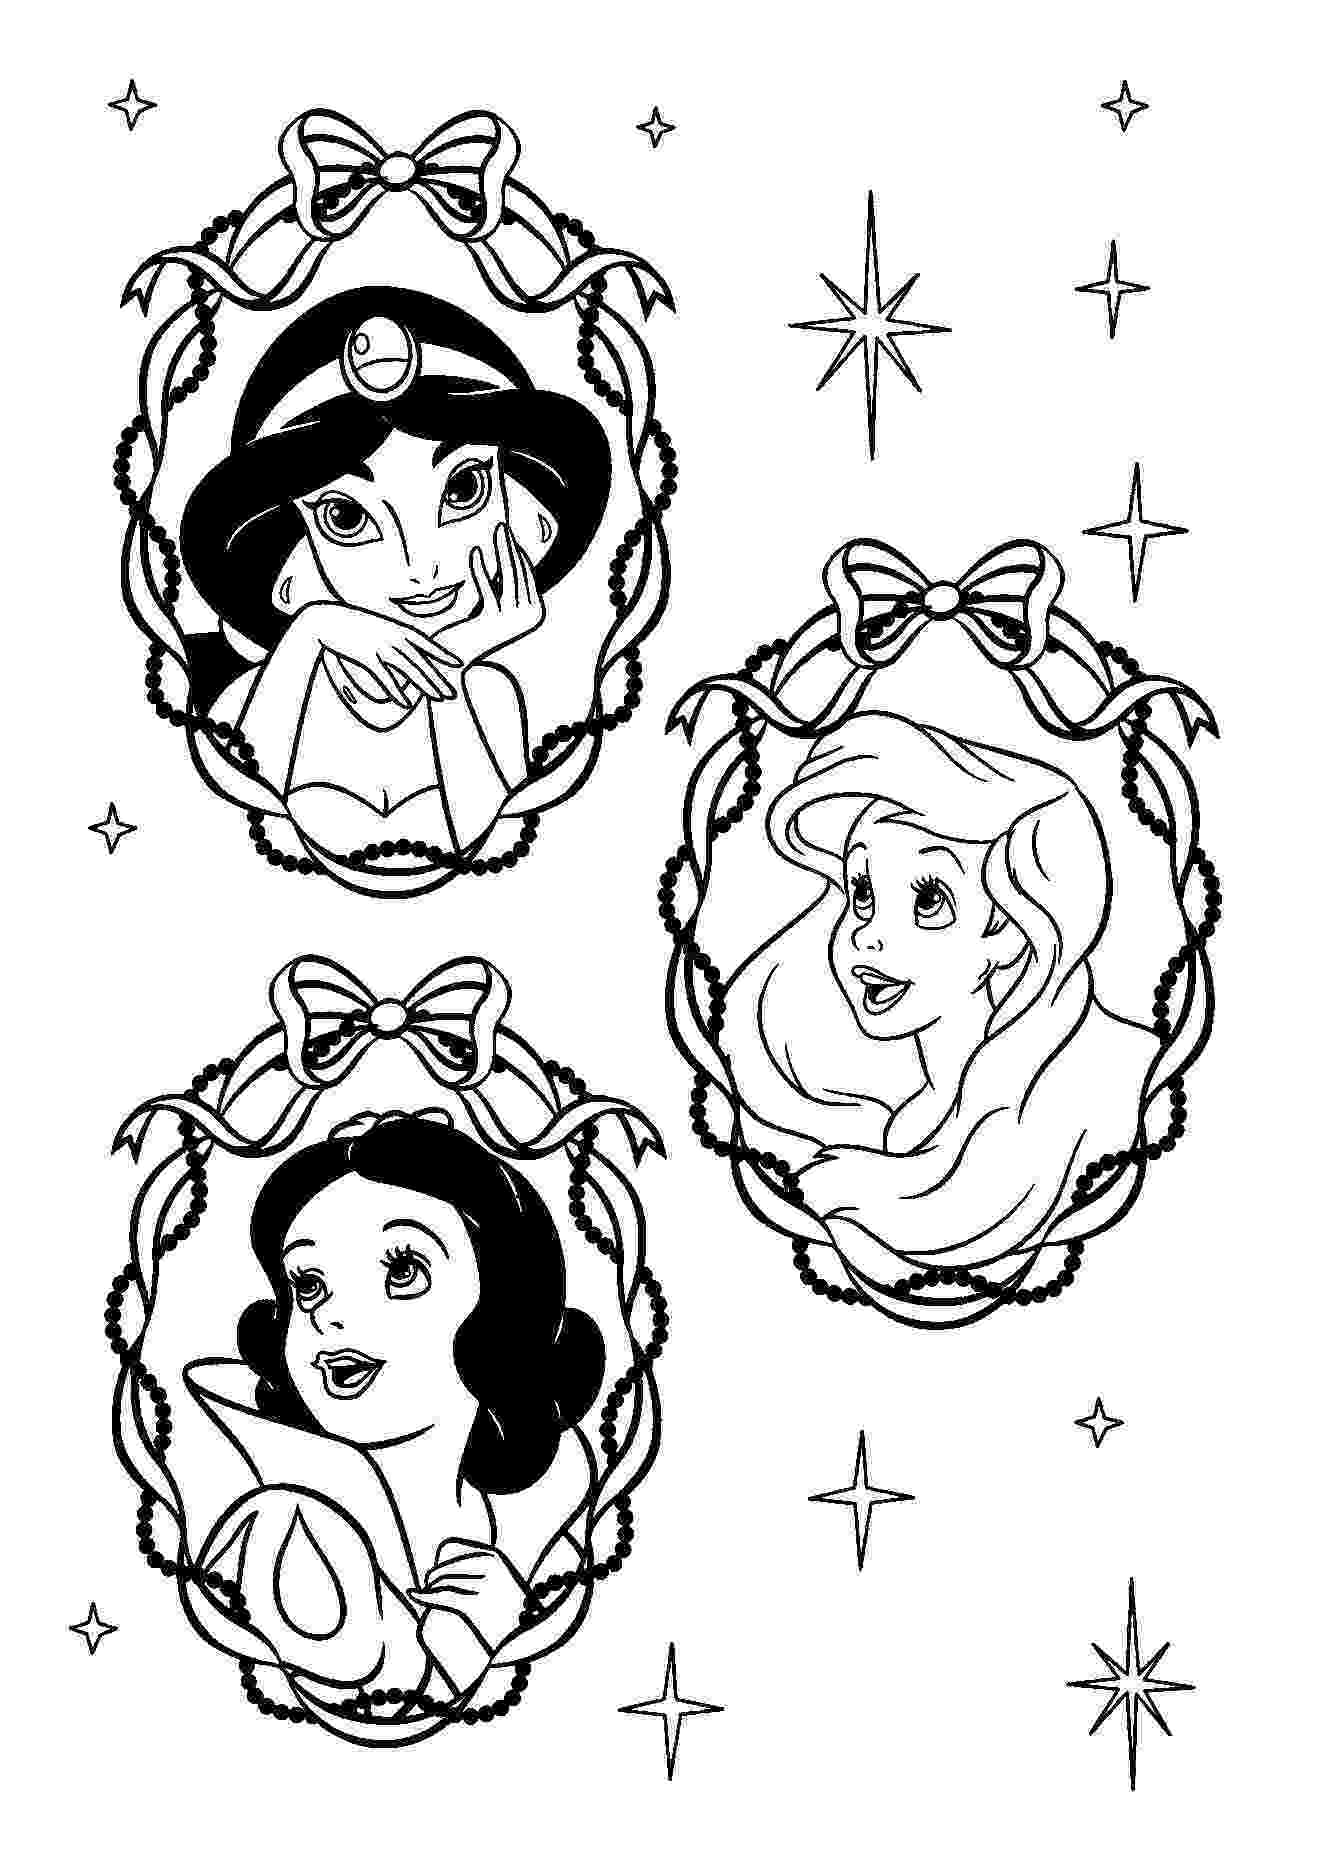 princess templates to color 20 princess coloring pages vector eps jpg free princess to color templates 